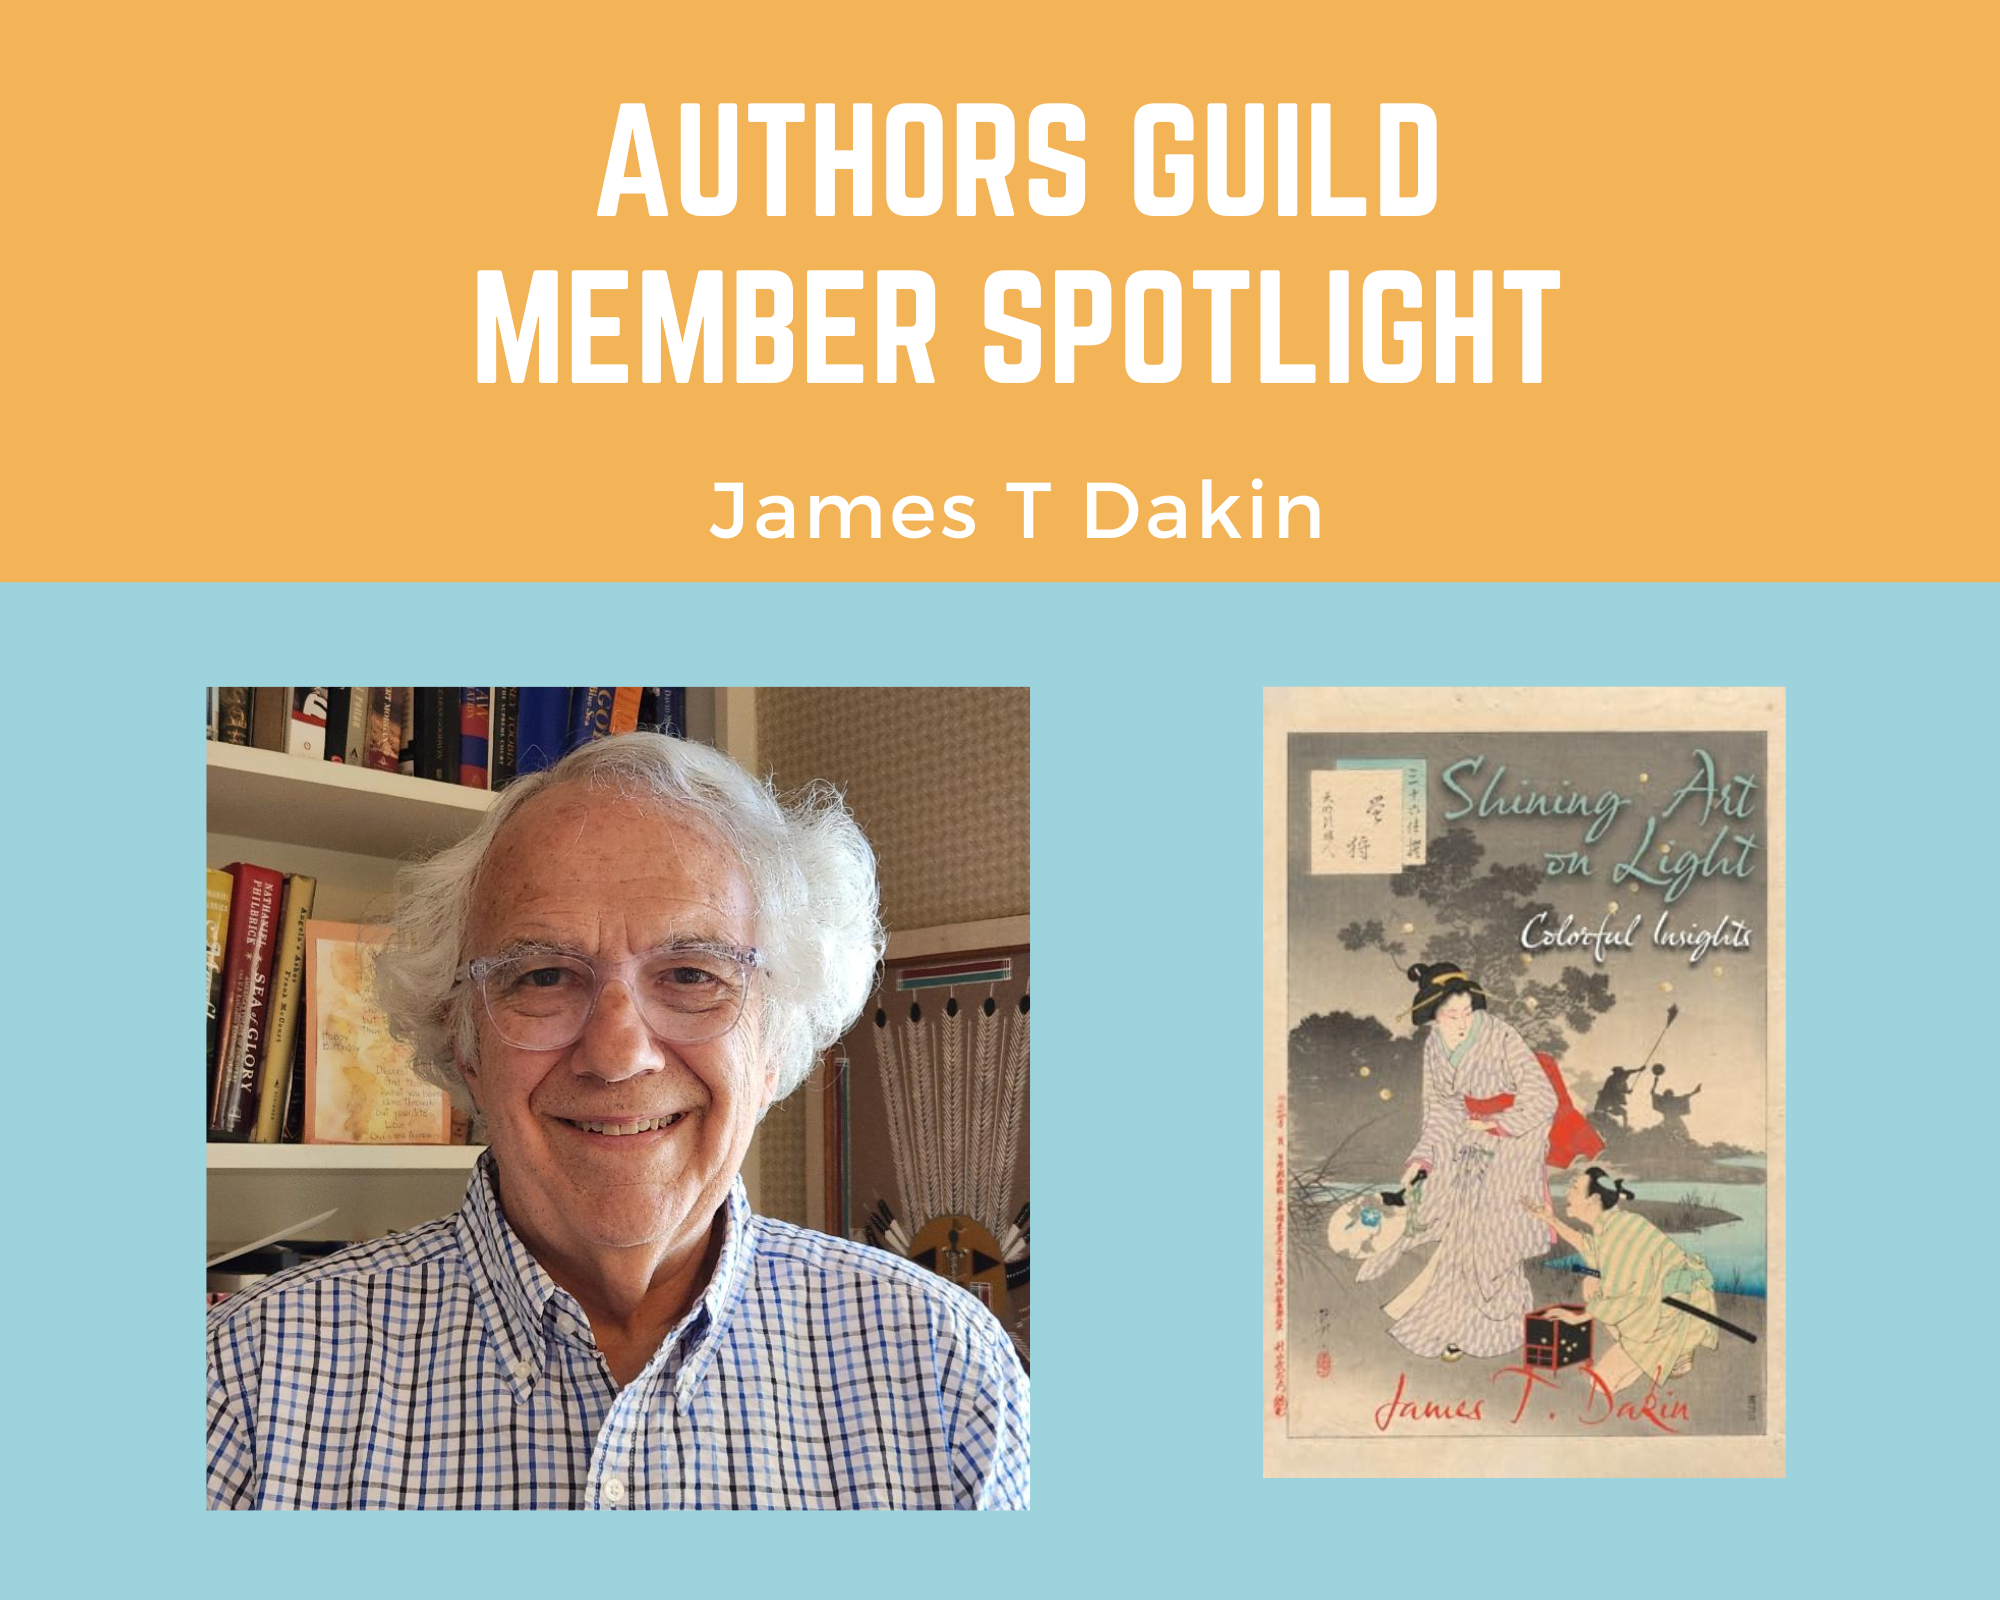 author James Dakin and his book Shining Art on Light